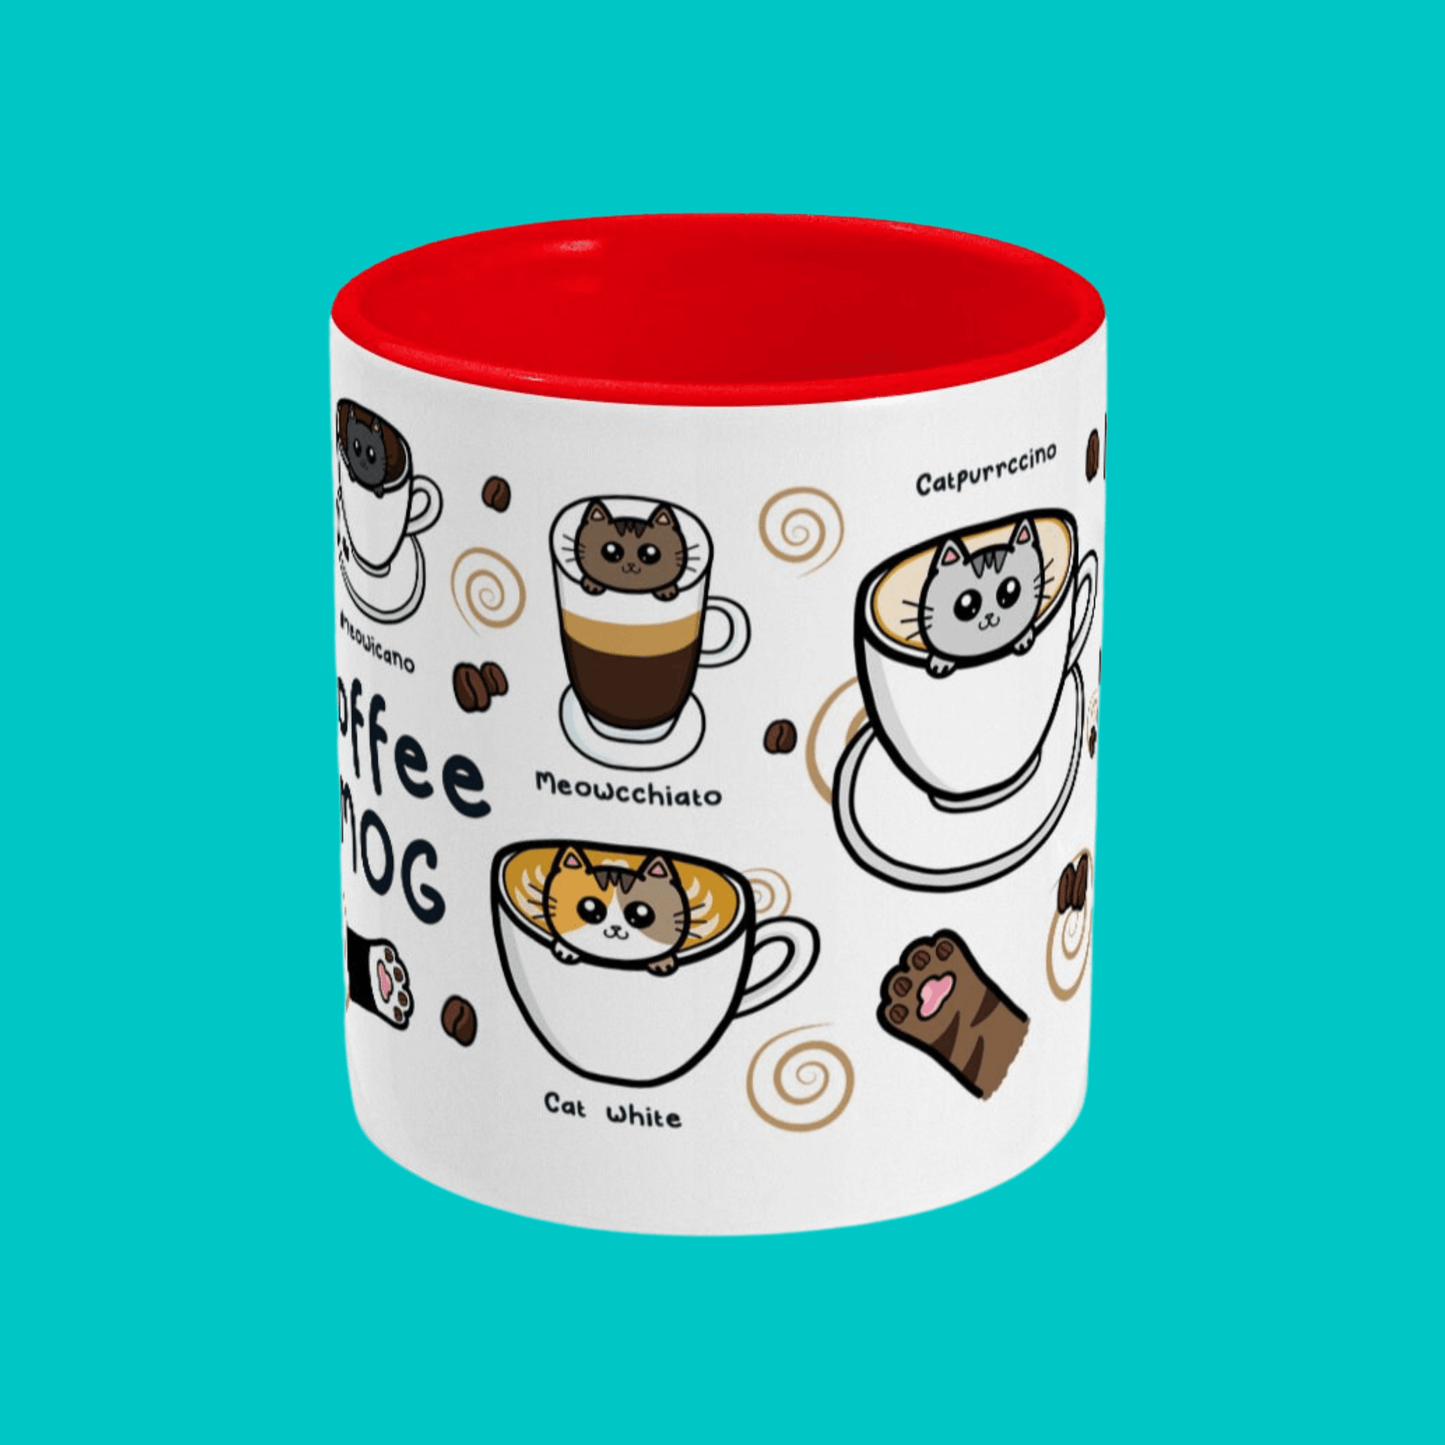 The Coffee Mog Cat Mug on a blue background. The cat themed white coffee mug with red inner and handle is facing forward to show illustrations of cat paw toe coffee beans, meowcchiato (a brown cat in a mochiatto), cat white (a tortoiseshell cat in a flat white), catpurrccino (a grey cat in a cappuccino) with coffee beans and brown swirls.